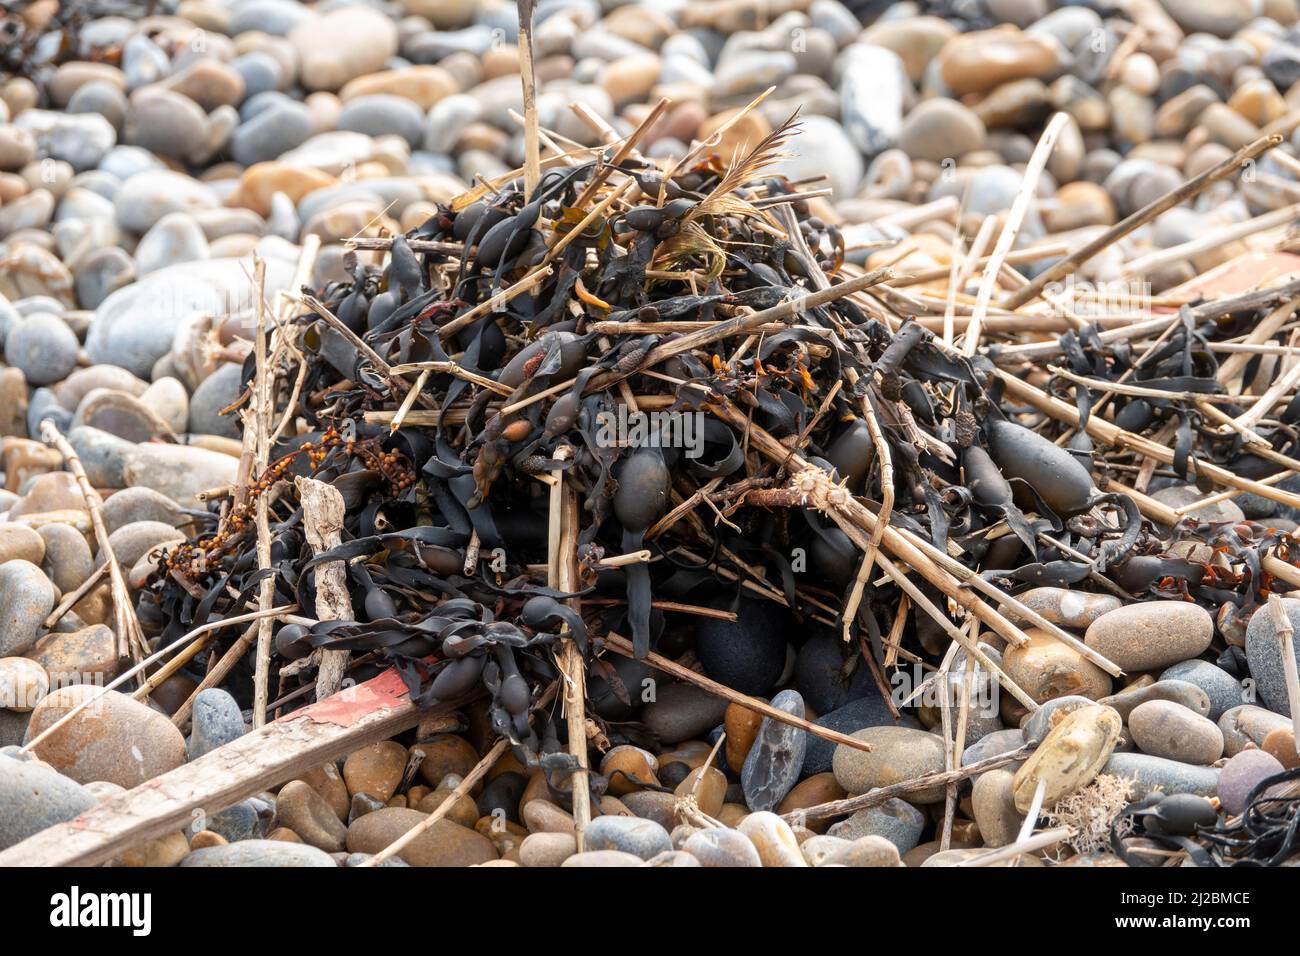 Small pile of light rubbish including dried seaweed on a pebble beach Stock Photo